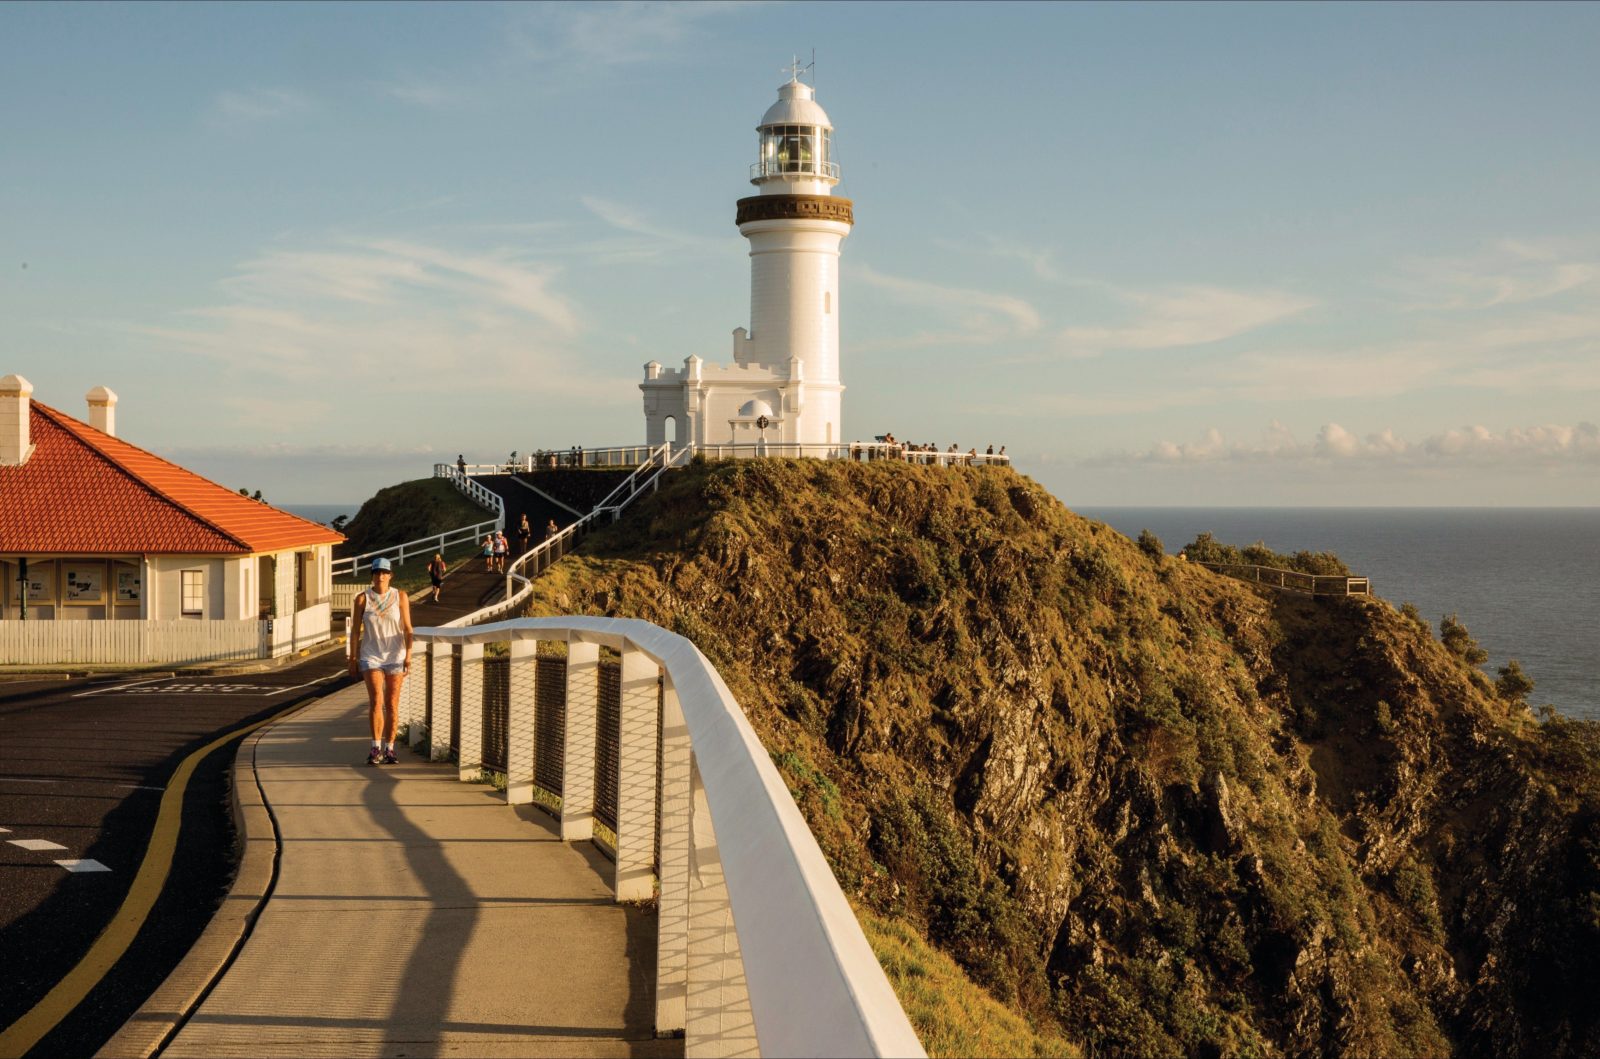 Cape Byron Lighthouse sitting on Australia's most easterly point, Byron Bay